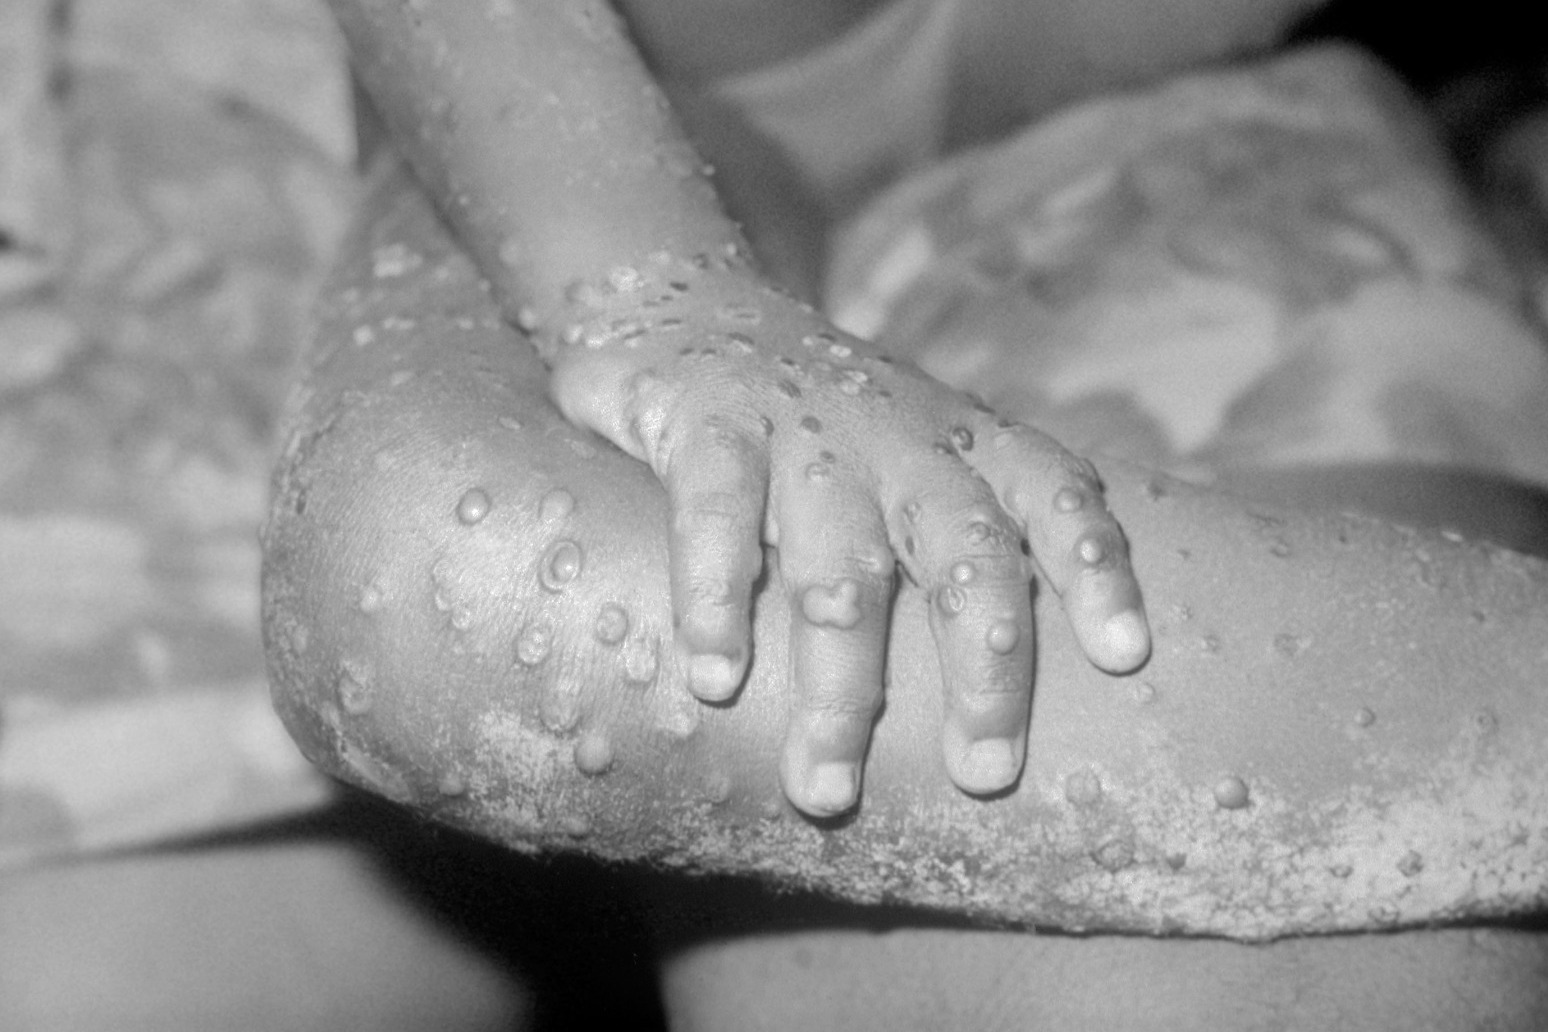 Medics must alert health authorities to monkeypox cases by law UKHSA says